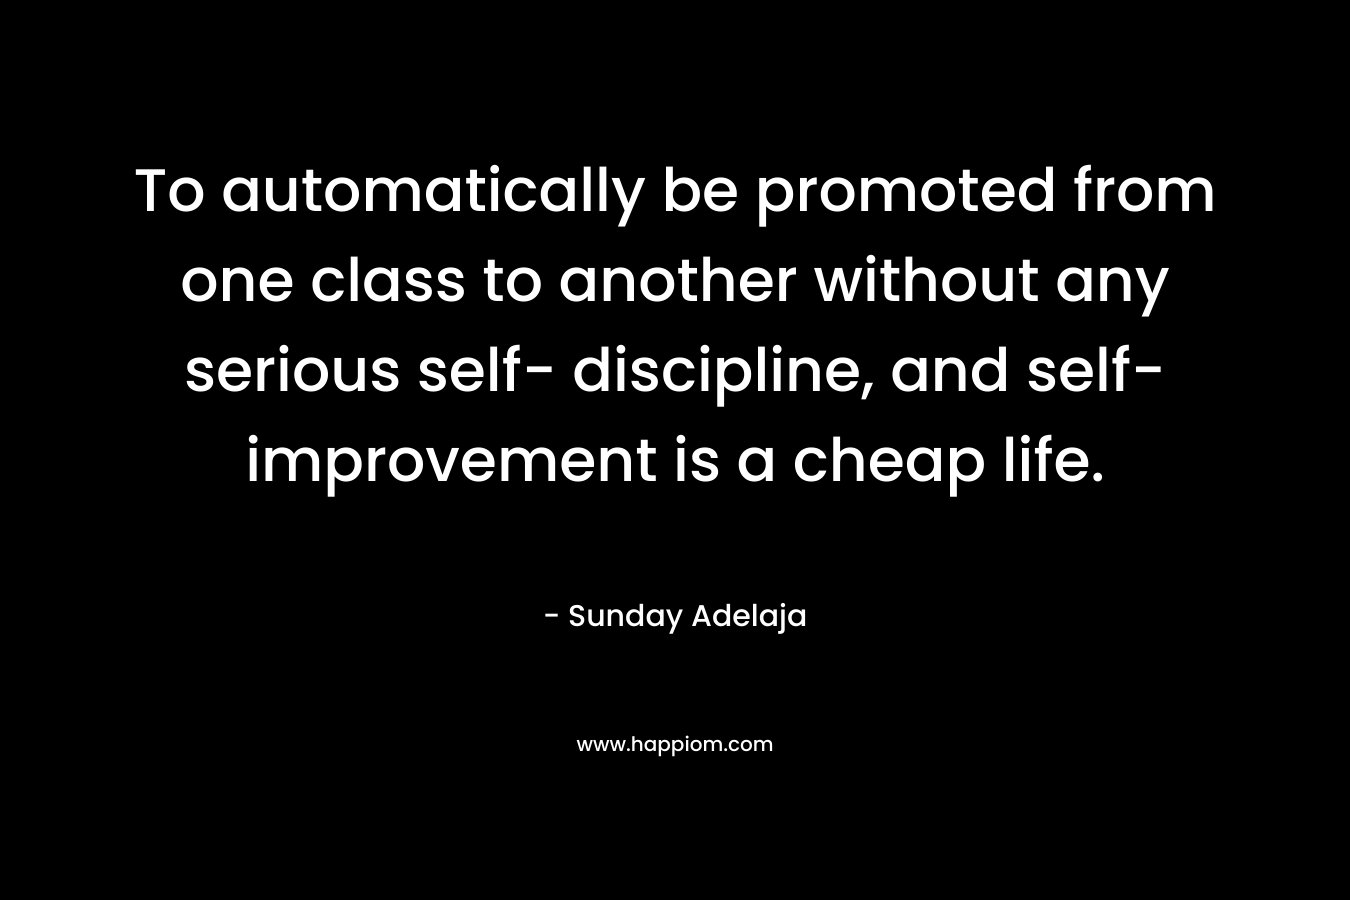 To automatically be promoted from one class to another without any serious self- discipline, and self- improvement is a cheap life.